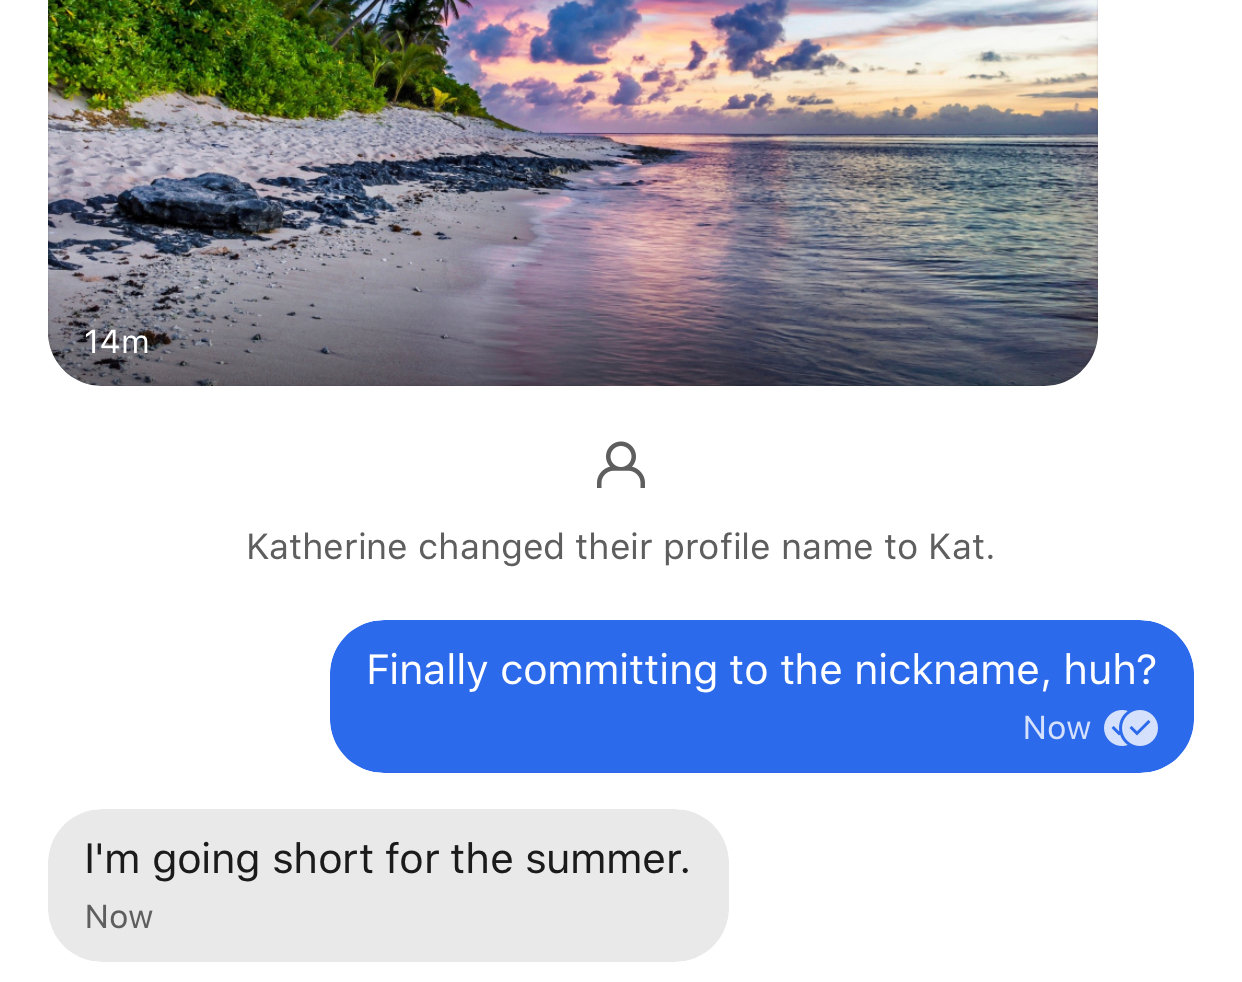 Profile name updates are also displayed in the conversation thread. Message Requests are now available in Signal, Aug 2020.